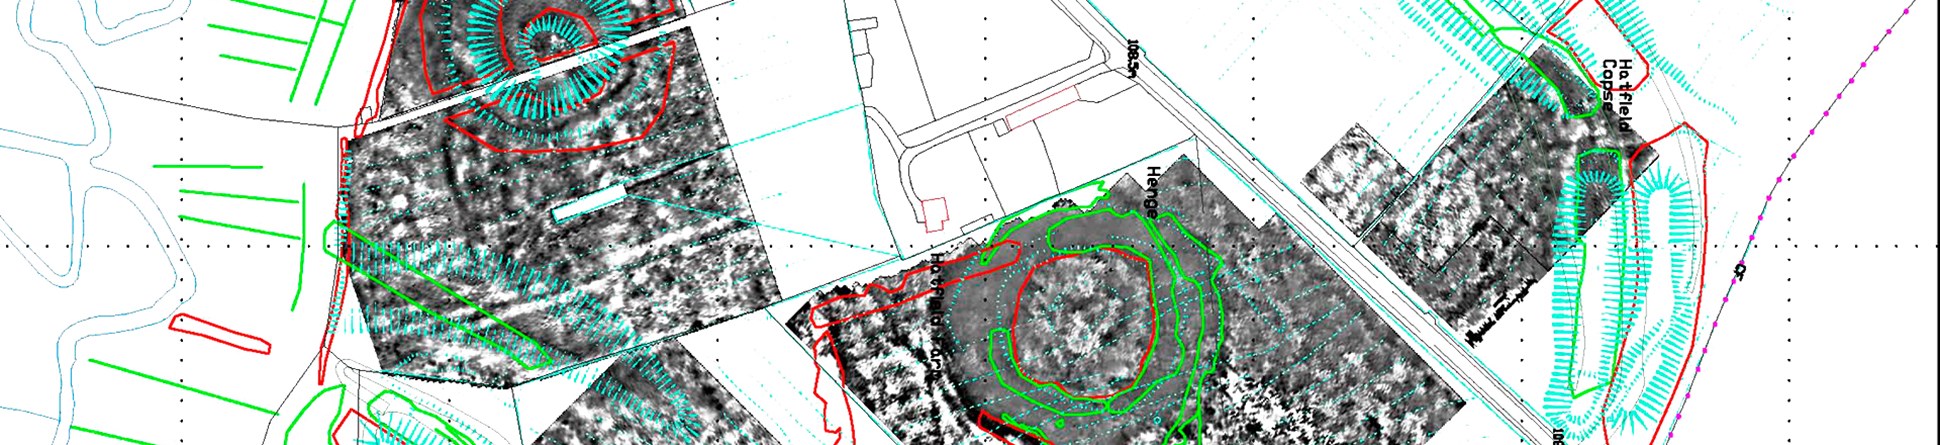 Colour image showing map background with blocks of grey showing the extent of geophysical survey and various coloured lines